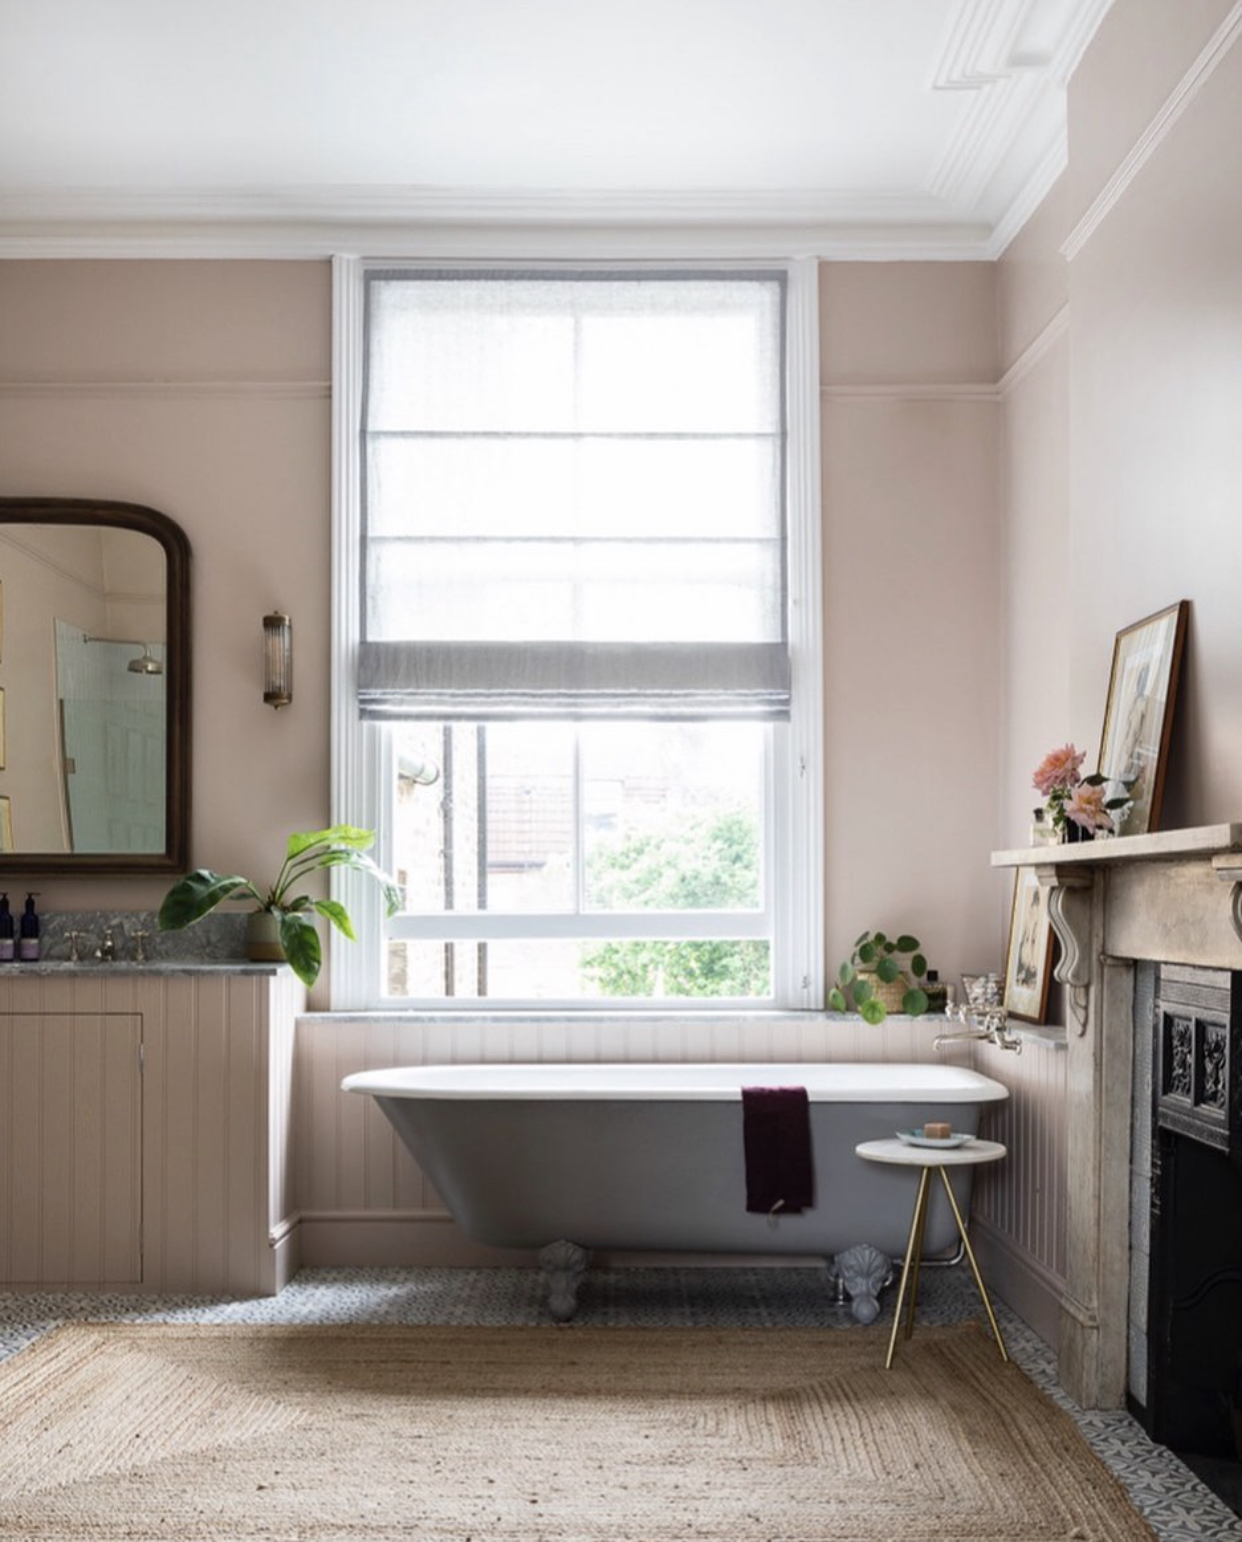 pink bathroom by imperfect interiors shot by Chris Snook